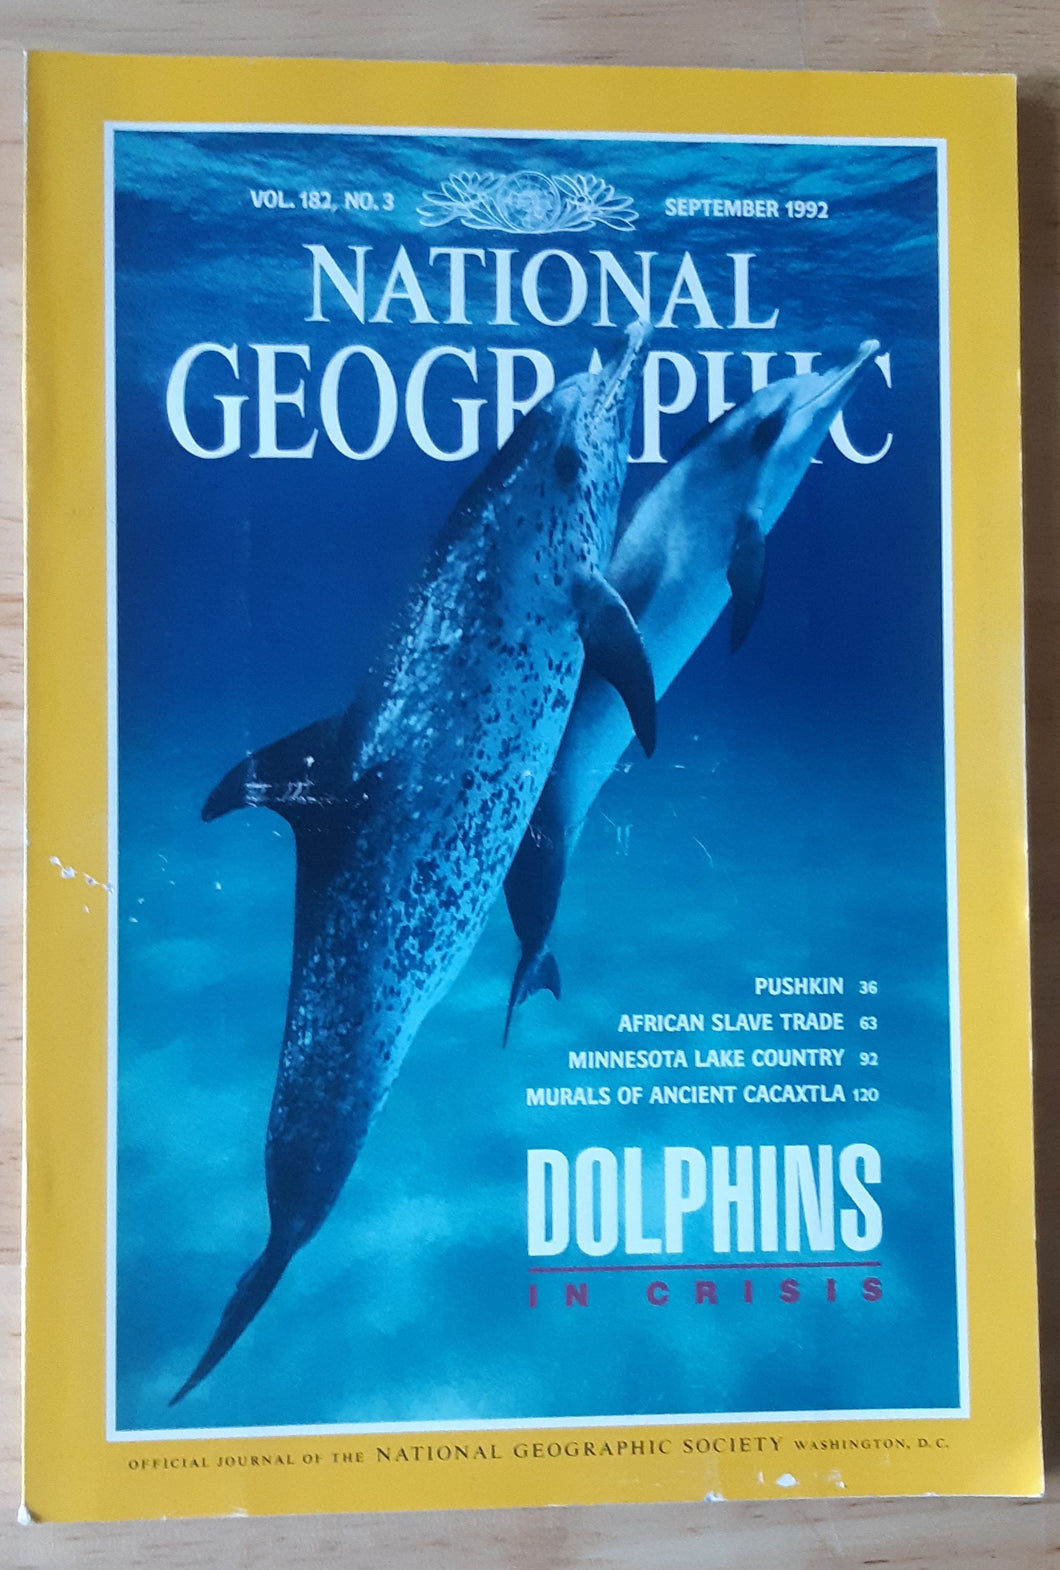 National Geographic - September 1992 (Vol. 182, No. 3)